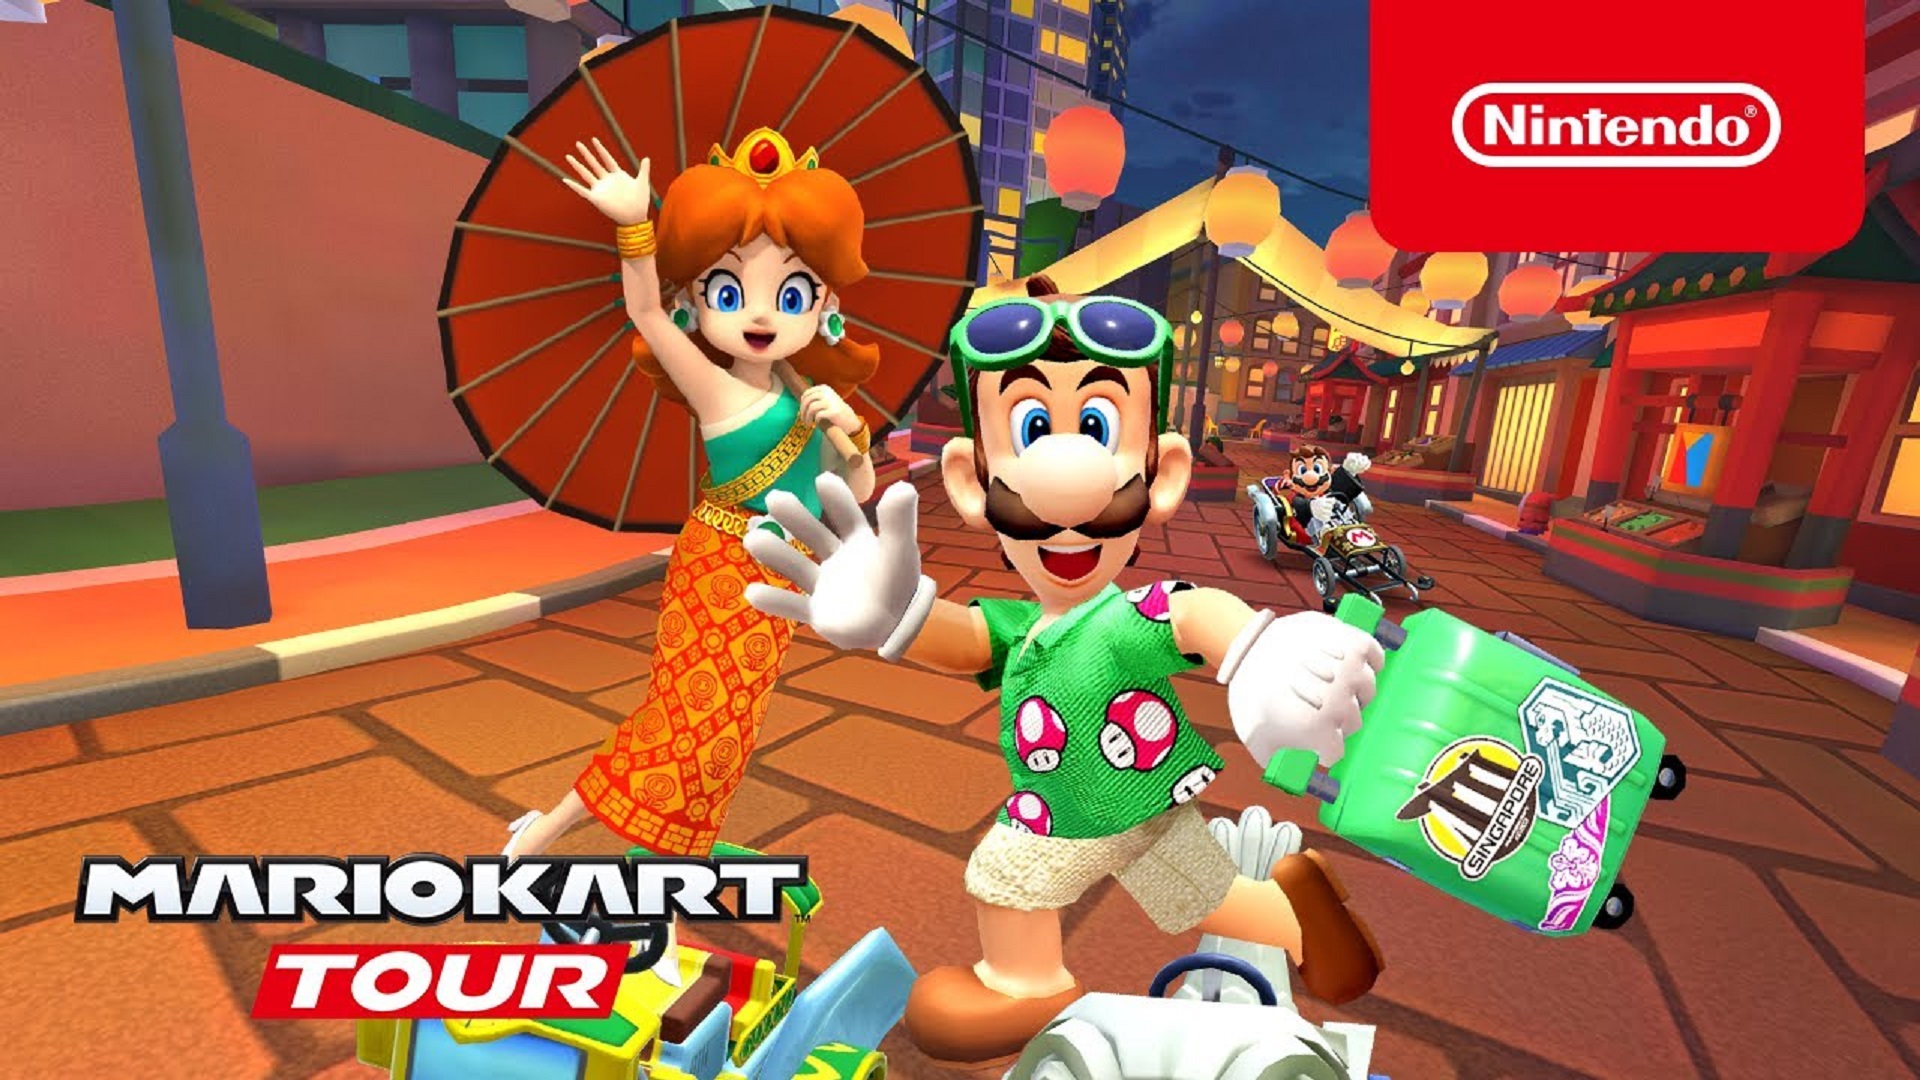 Daisy and Luigi race on one of the Bangkok rush stages